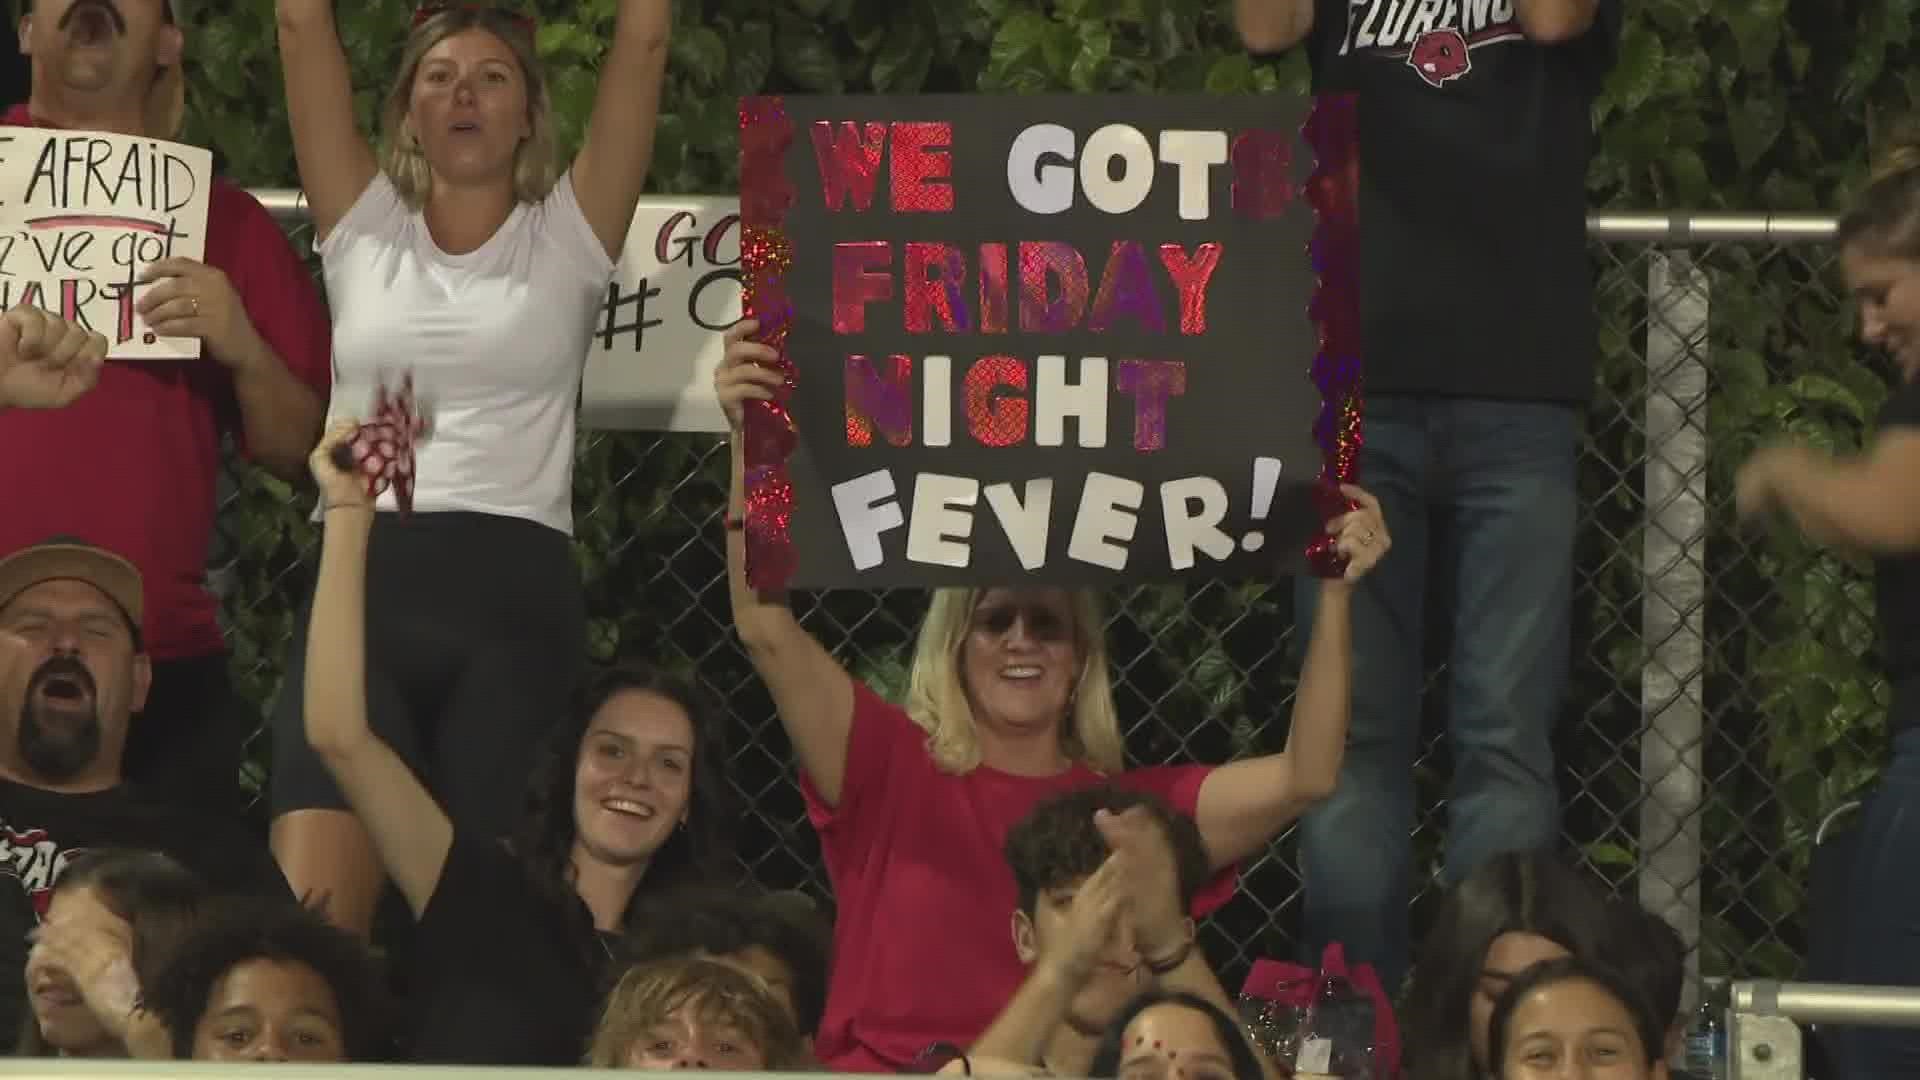 Friday Night Fever made it out to Coolidge after a whopping 77k votes decided this week’s Game of the Week.